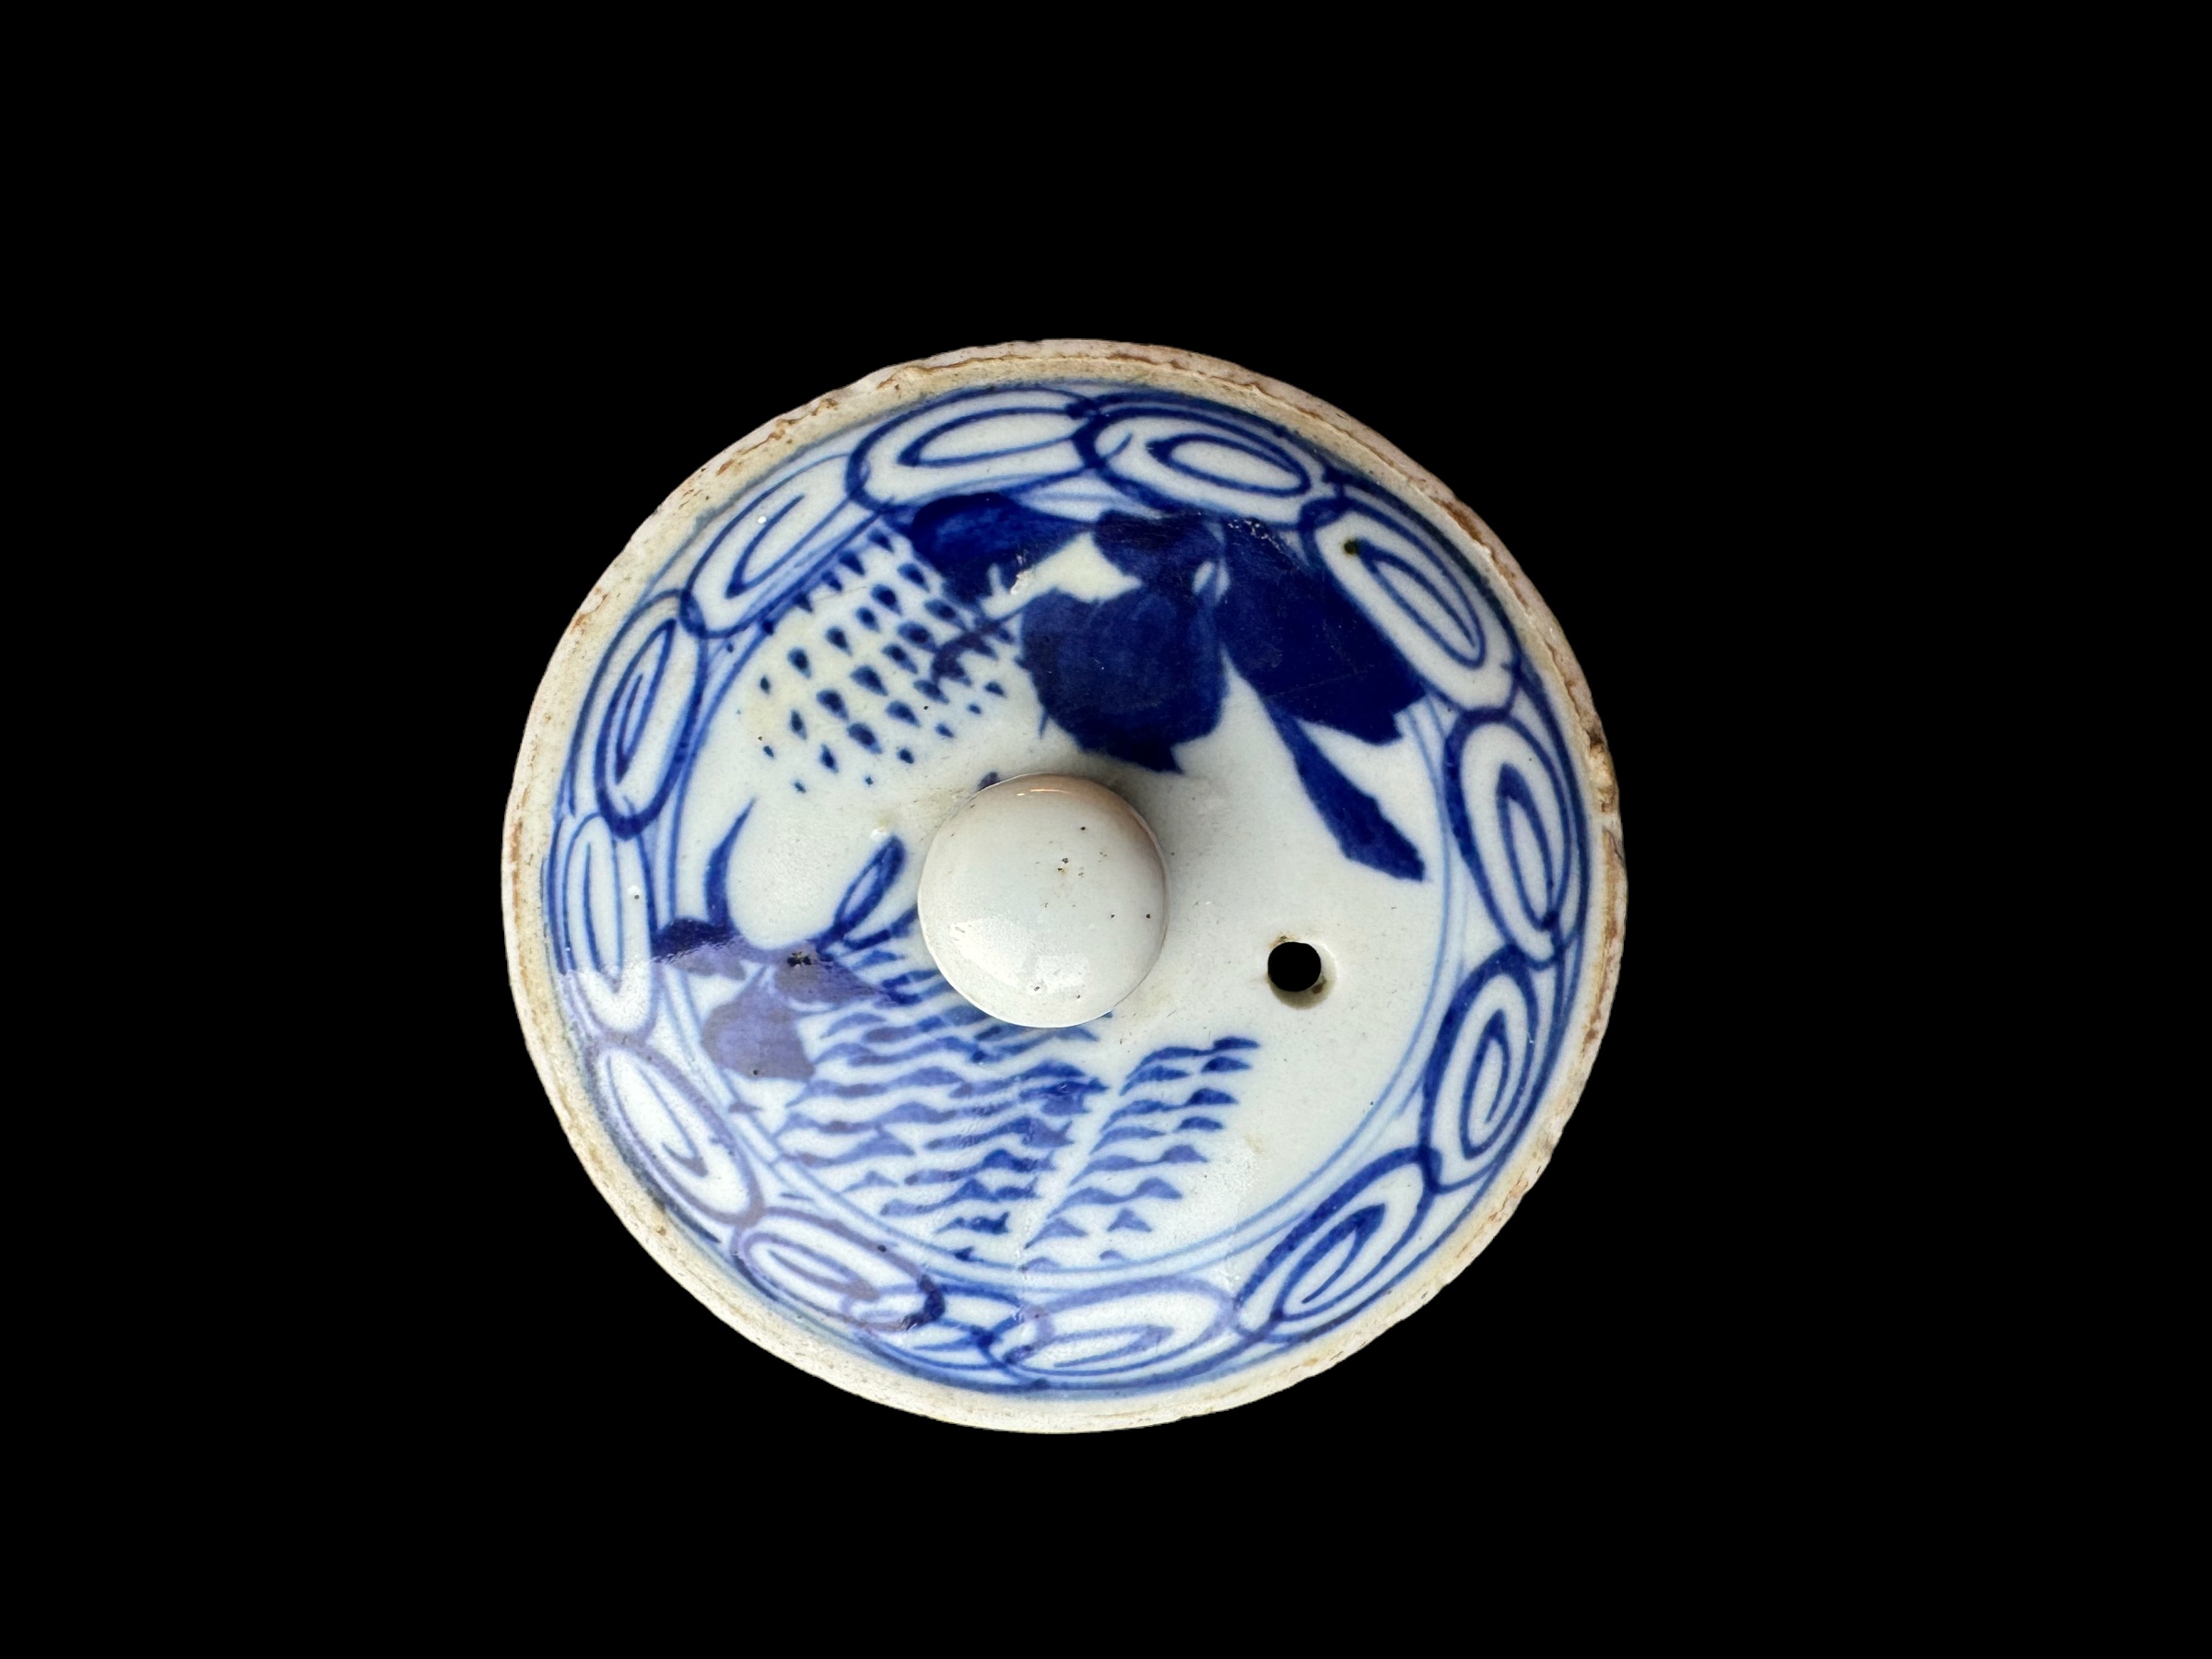 Antique Chinese Porcelain Teapot 17th-18th Century - Image 4 of 5